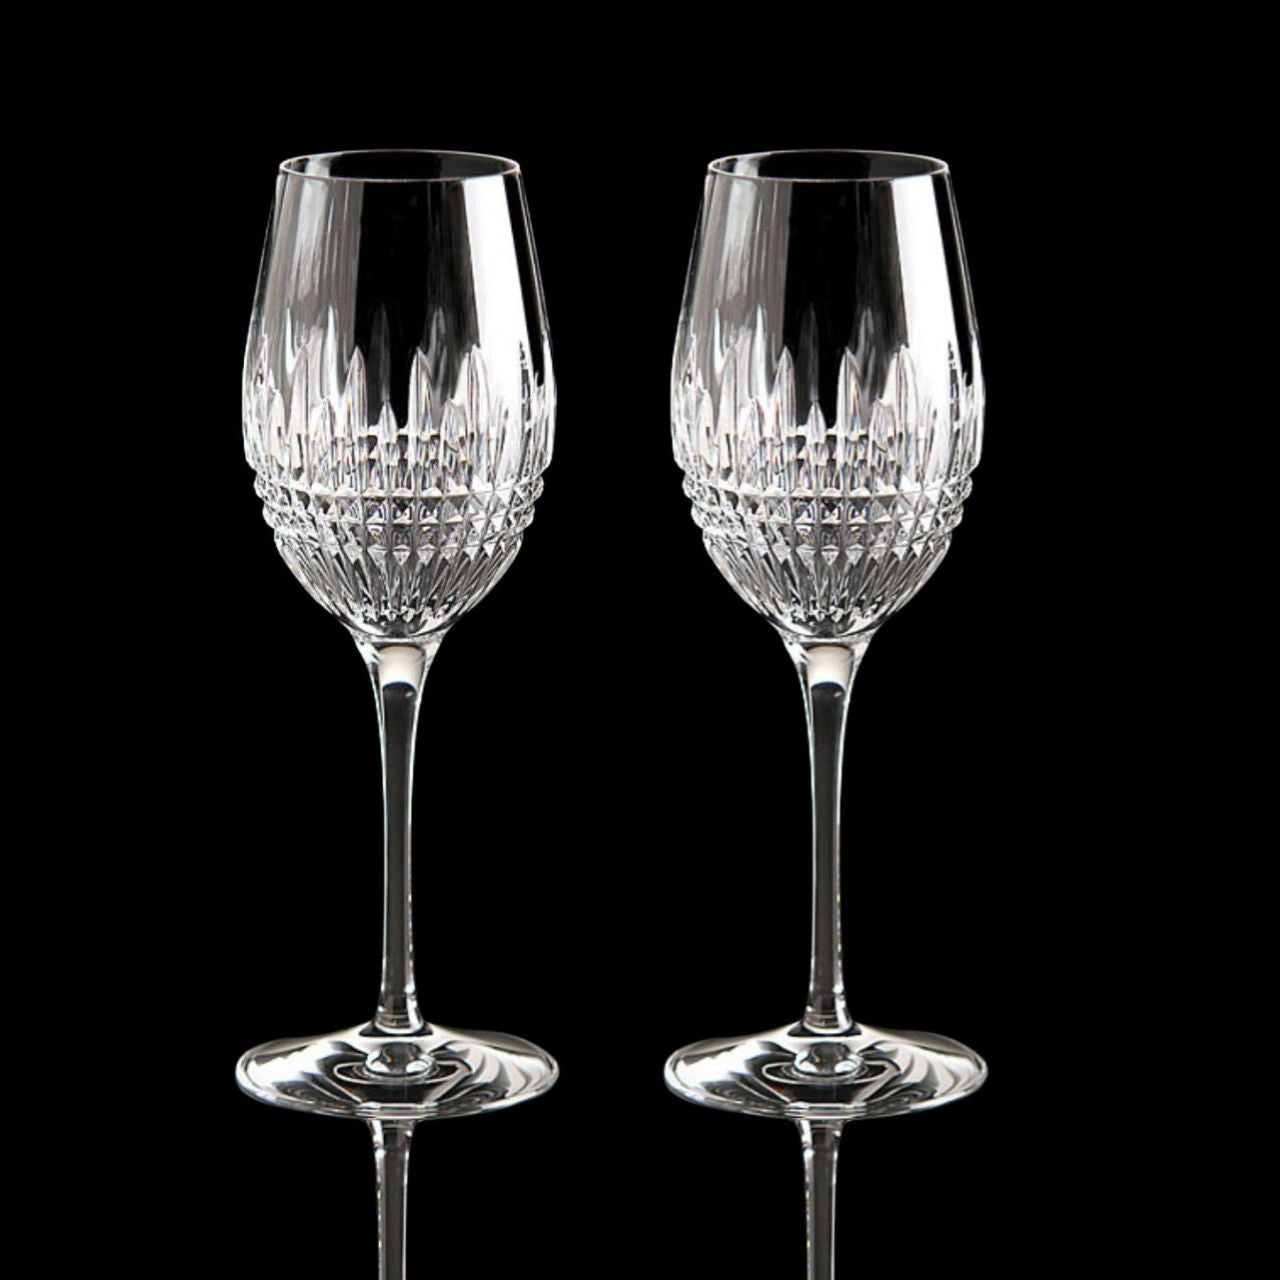 Waterford Crystal Lismore Diamond Essence Wine Pair  This classic Lismore Diamond Essence Wine Pair from Waterford offer the perfect serve for your favourite wine. Featuring the famous ring and upright cuts of the Lismore Diamond pattern, these luxurious glasses will coordinate well with existing Diamond pieces as well as bringing their own style to your home.